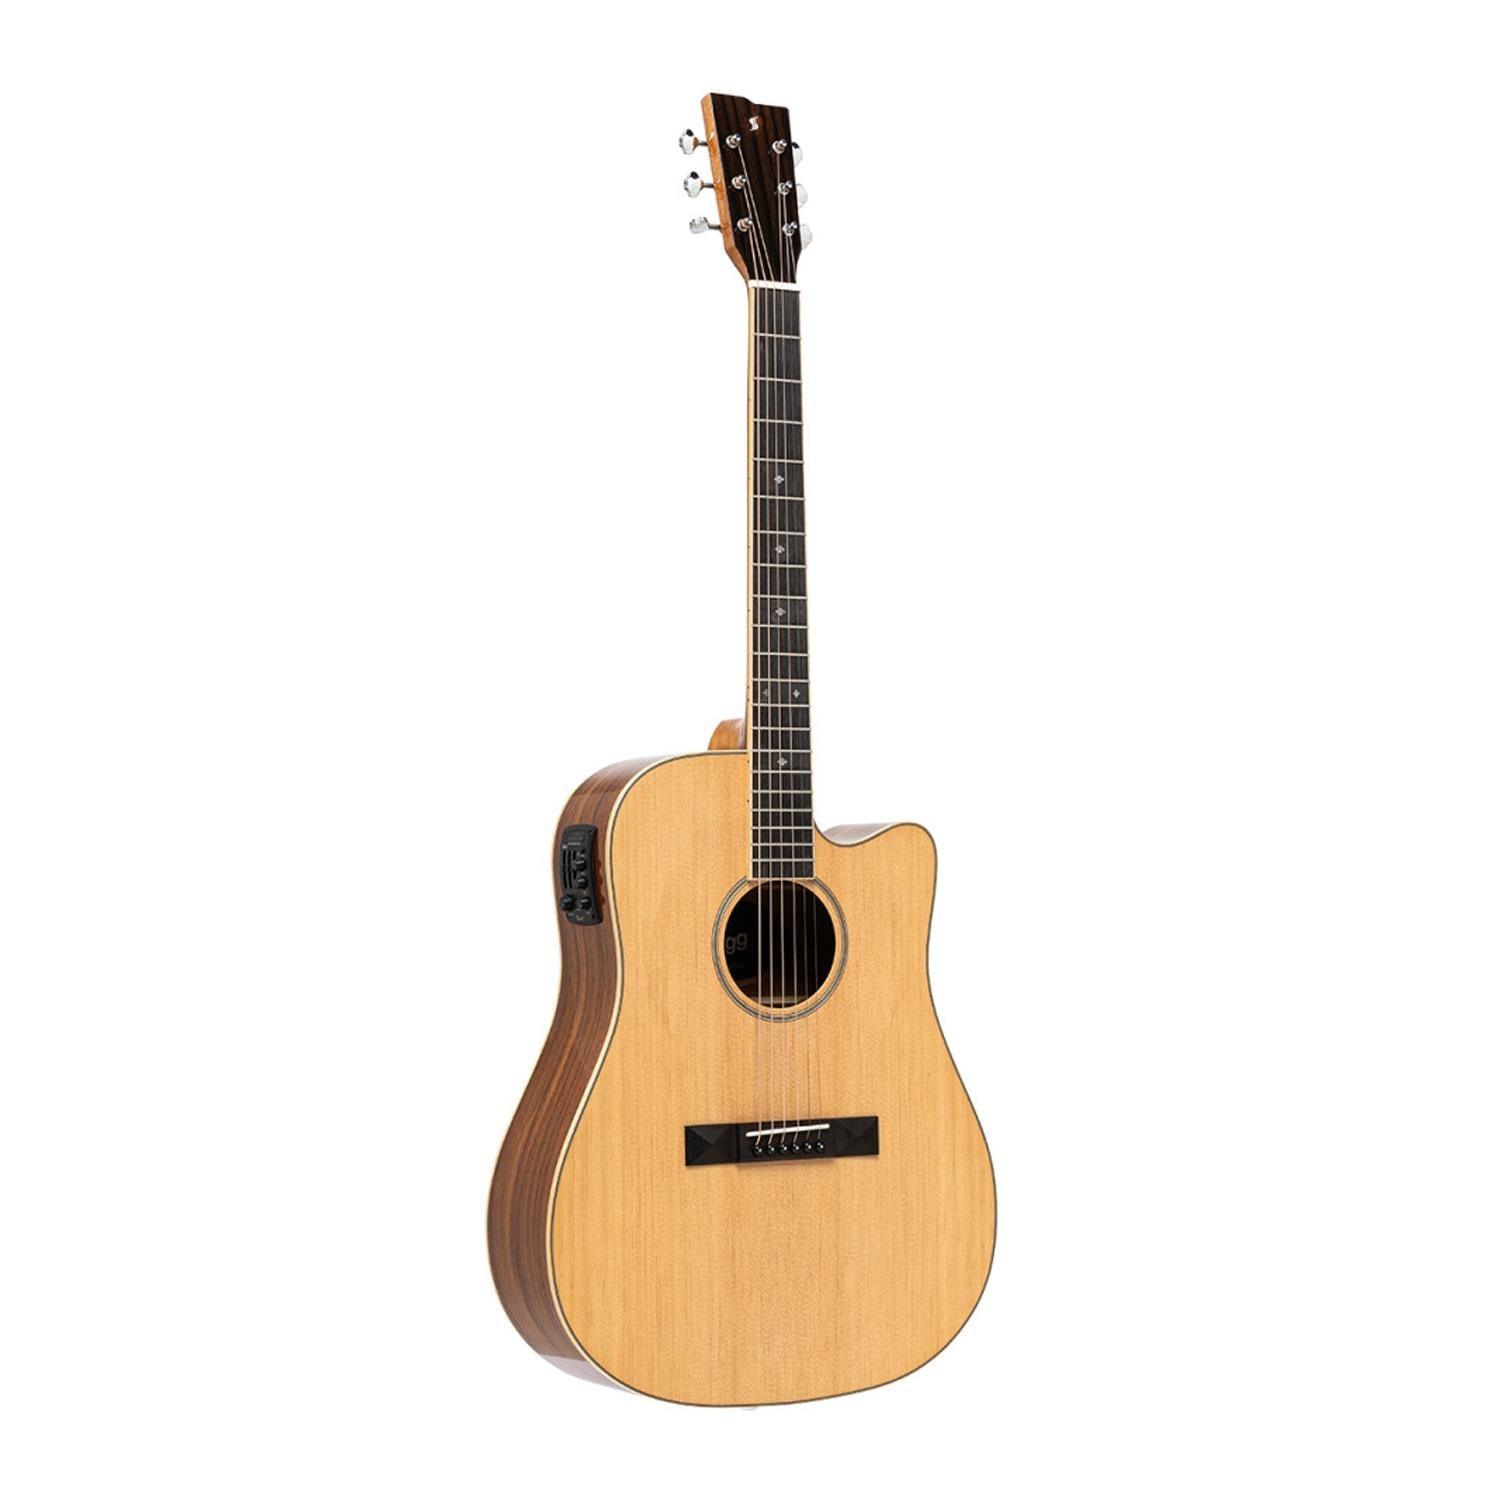 Stagg SA45 DCE-AC Series 45 Natural Dreadnought Acoustic-Electric Guitar - DY Pro Audio